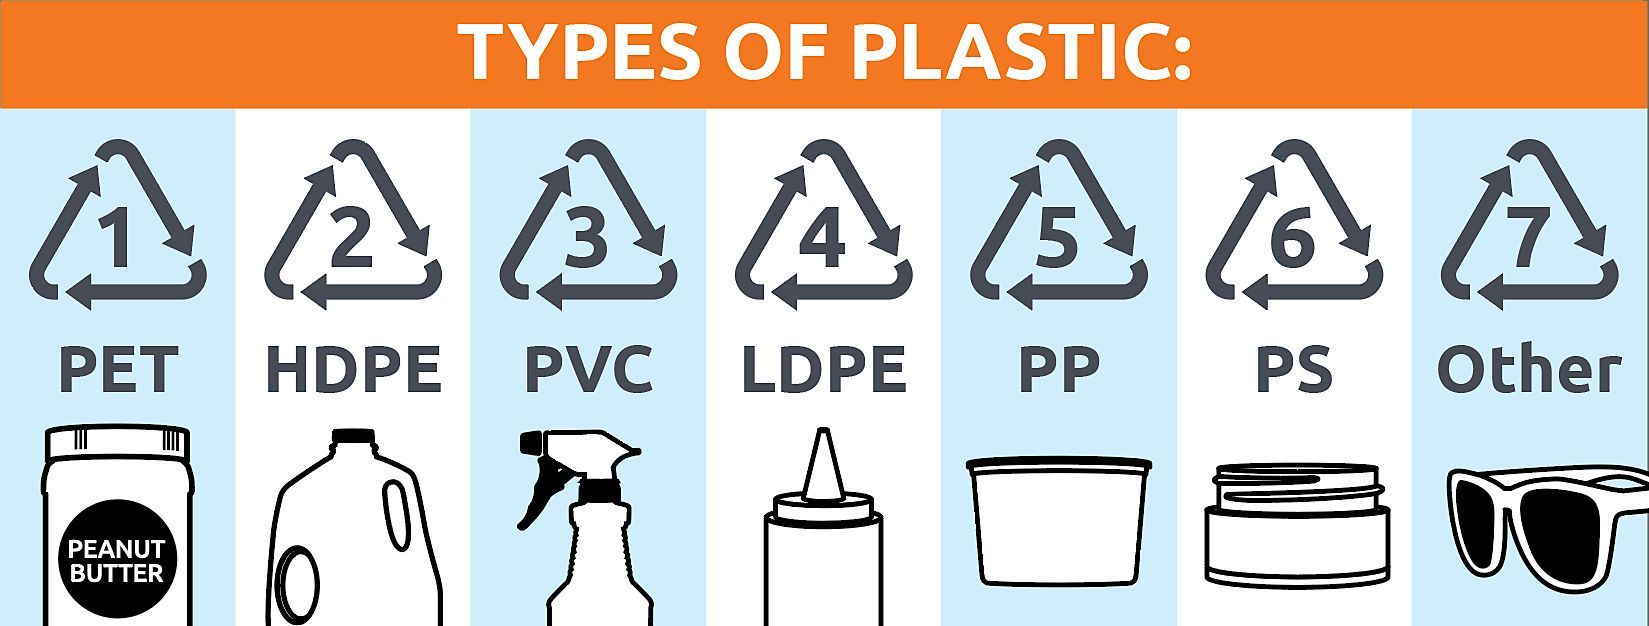 What Plastics Can be Recycled? 